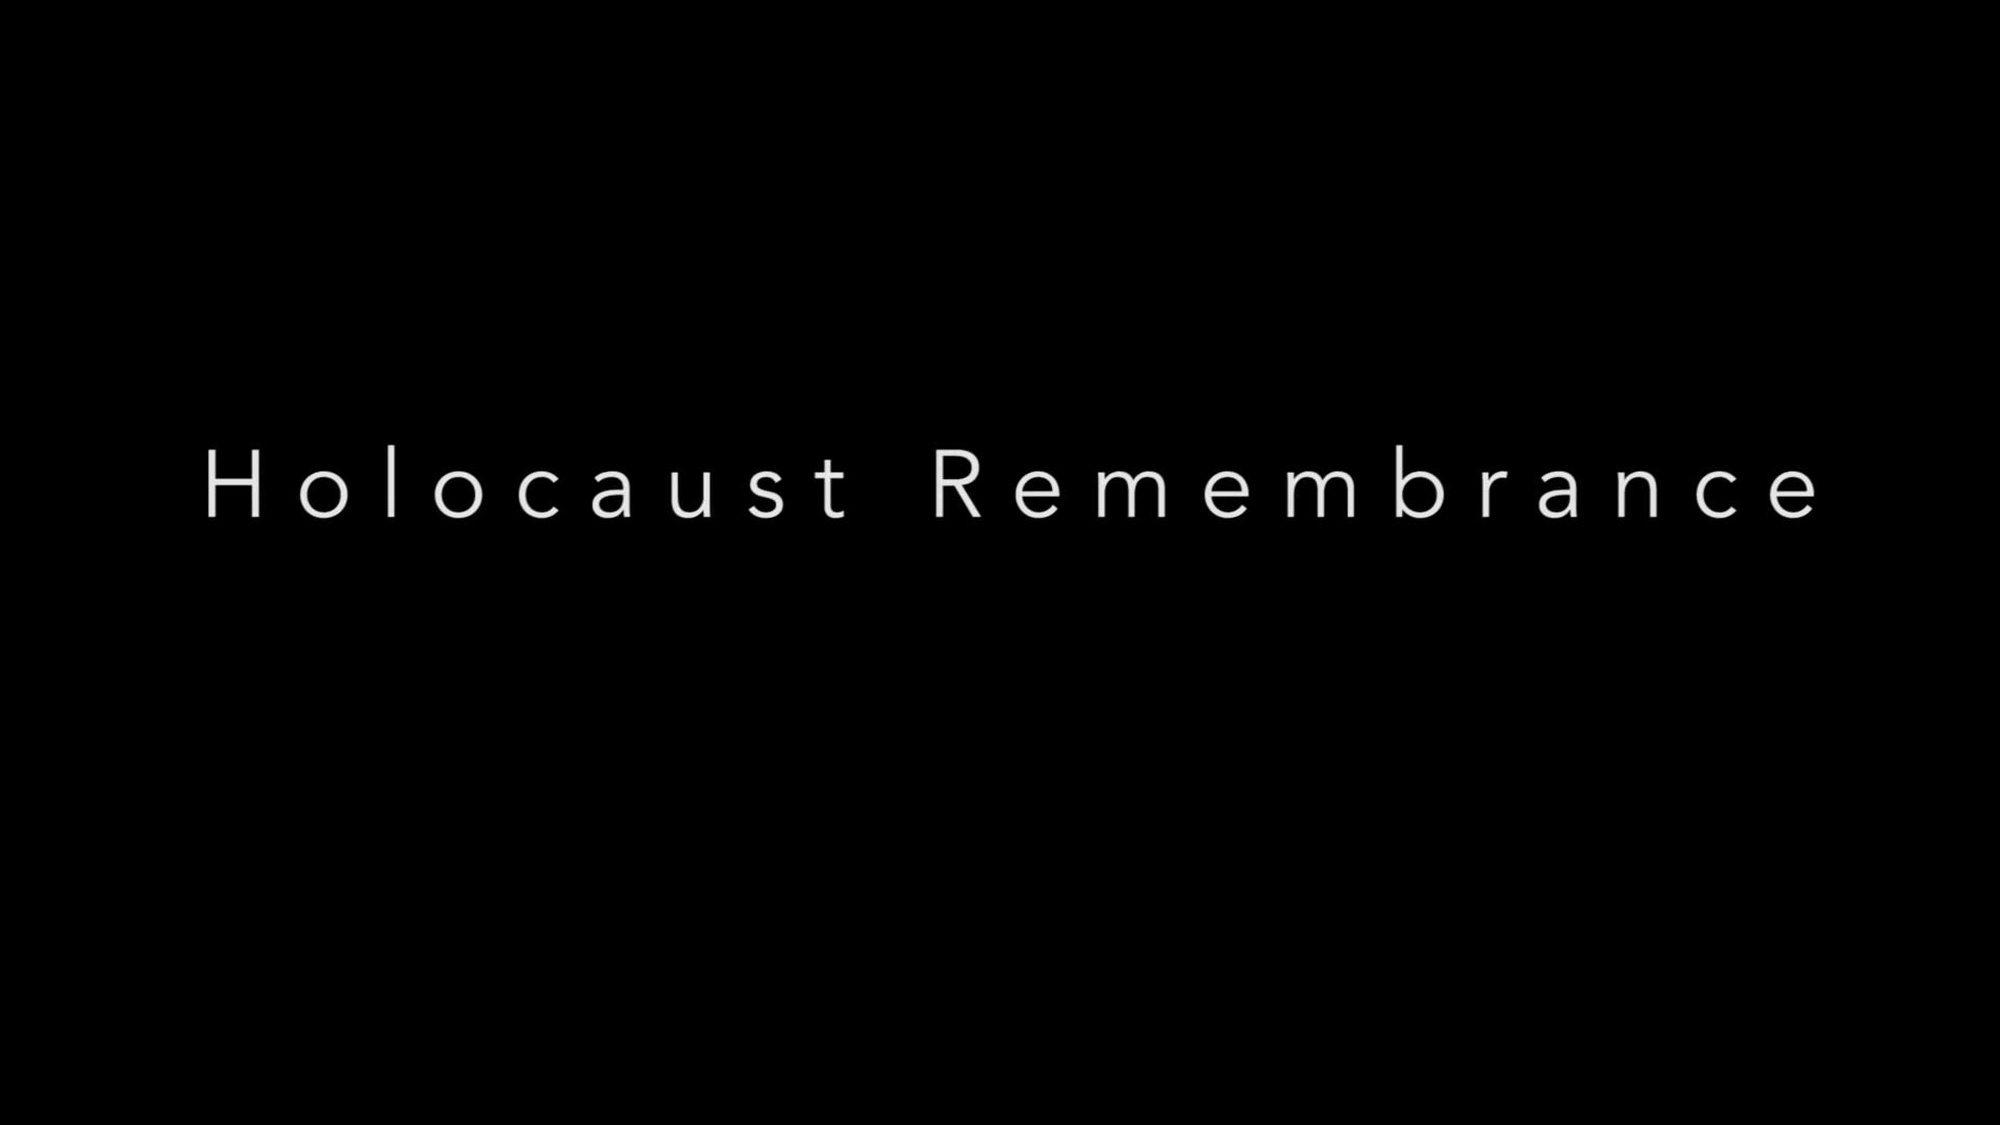 Together, with courageous survivors, descendants of victims, and people around the world, we observe Yom HaShoah and continue these Holocaust Days of Remembrance to mourn the six million people lost during the Holocaust. 1st Lt. Mendel Avtzon, a judge advocate for the Scott Legal Office, took time to share his family's story and explain why this day is so important to remember. 

For those that don't know, the internationally recognized date for Holocaust Remembrance Day corresponds to the 27th day of Nisan on the Hebrew calendar. It marks the anniversary of the Warsaw Ghetto Uprising. In Hebrew, Holocaust Remembrance Day is called Yom Hashoah. When the actual date of Yom Hashoah falls on a Friday, the state of Israel observes Yom Hashoah on the preceding Thursday. When it falls on a Sunday, Yom Hashoah is observed on the following Monday. In the United States, Days of Remembrance runs from the Sunday before Yom Hashoah through the following Sunday.